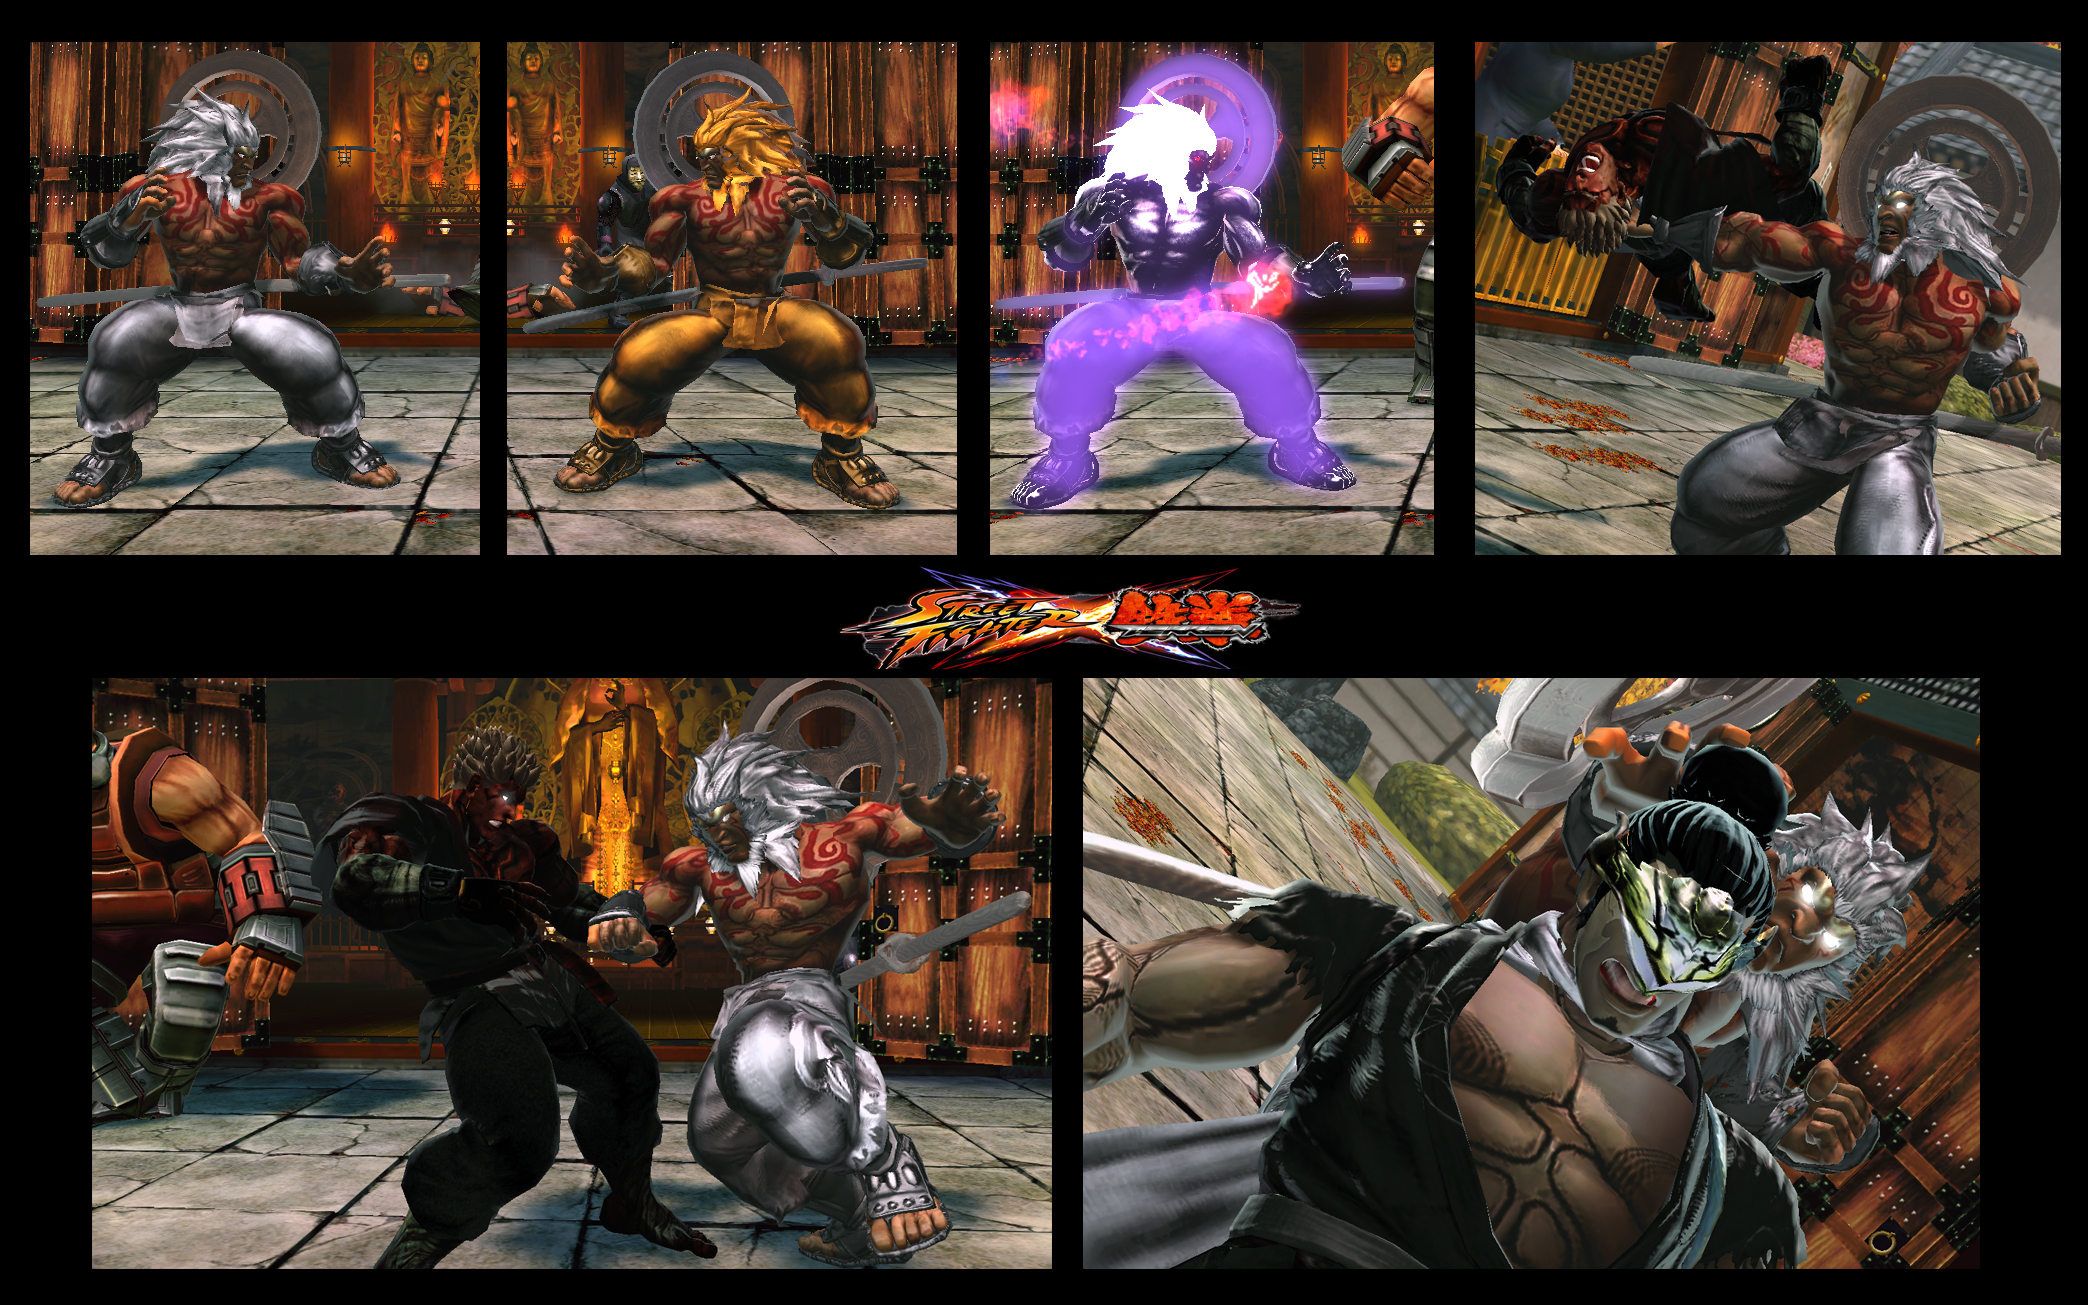 HQ Asura's Wrath Street Fighter Wallpapers | File 2173.54Kb